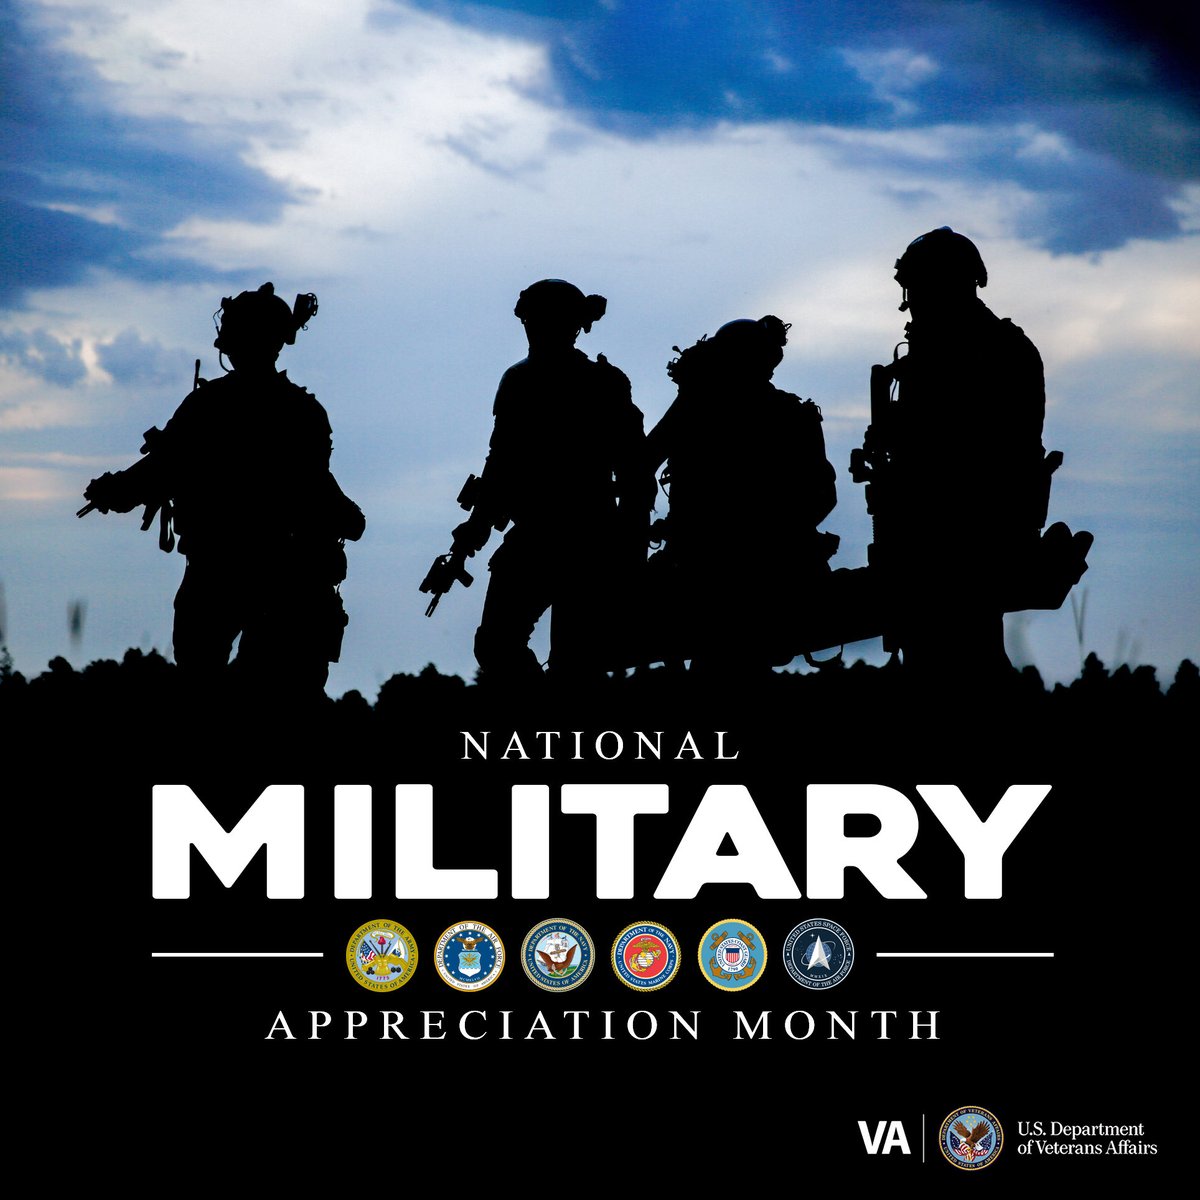 MAY IS NATIONAL MILITARY APPRECIATION MONTH